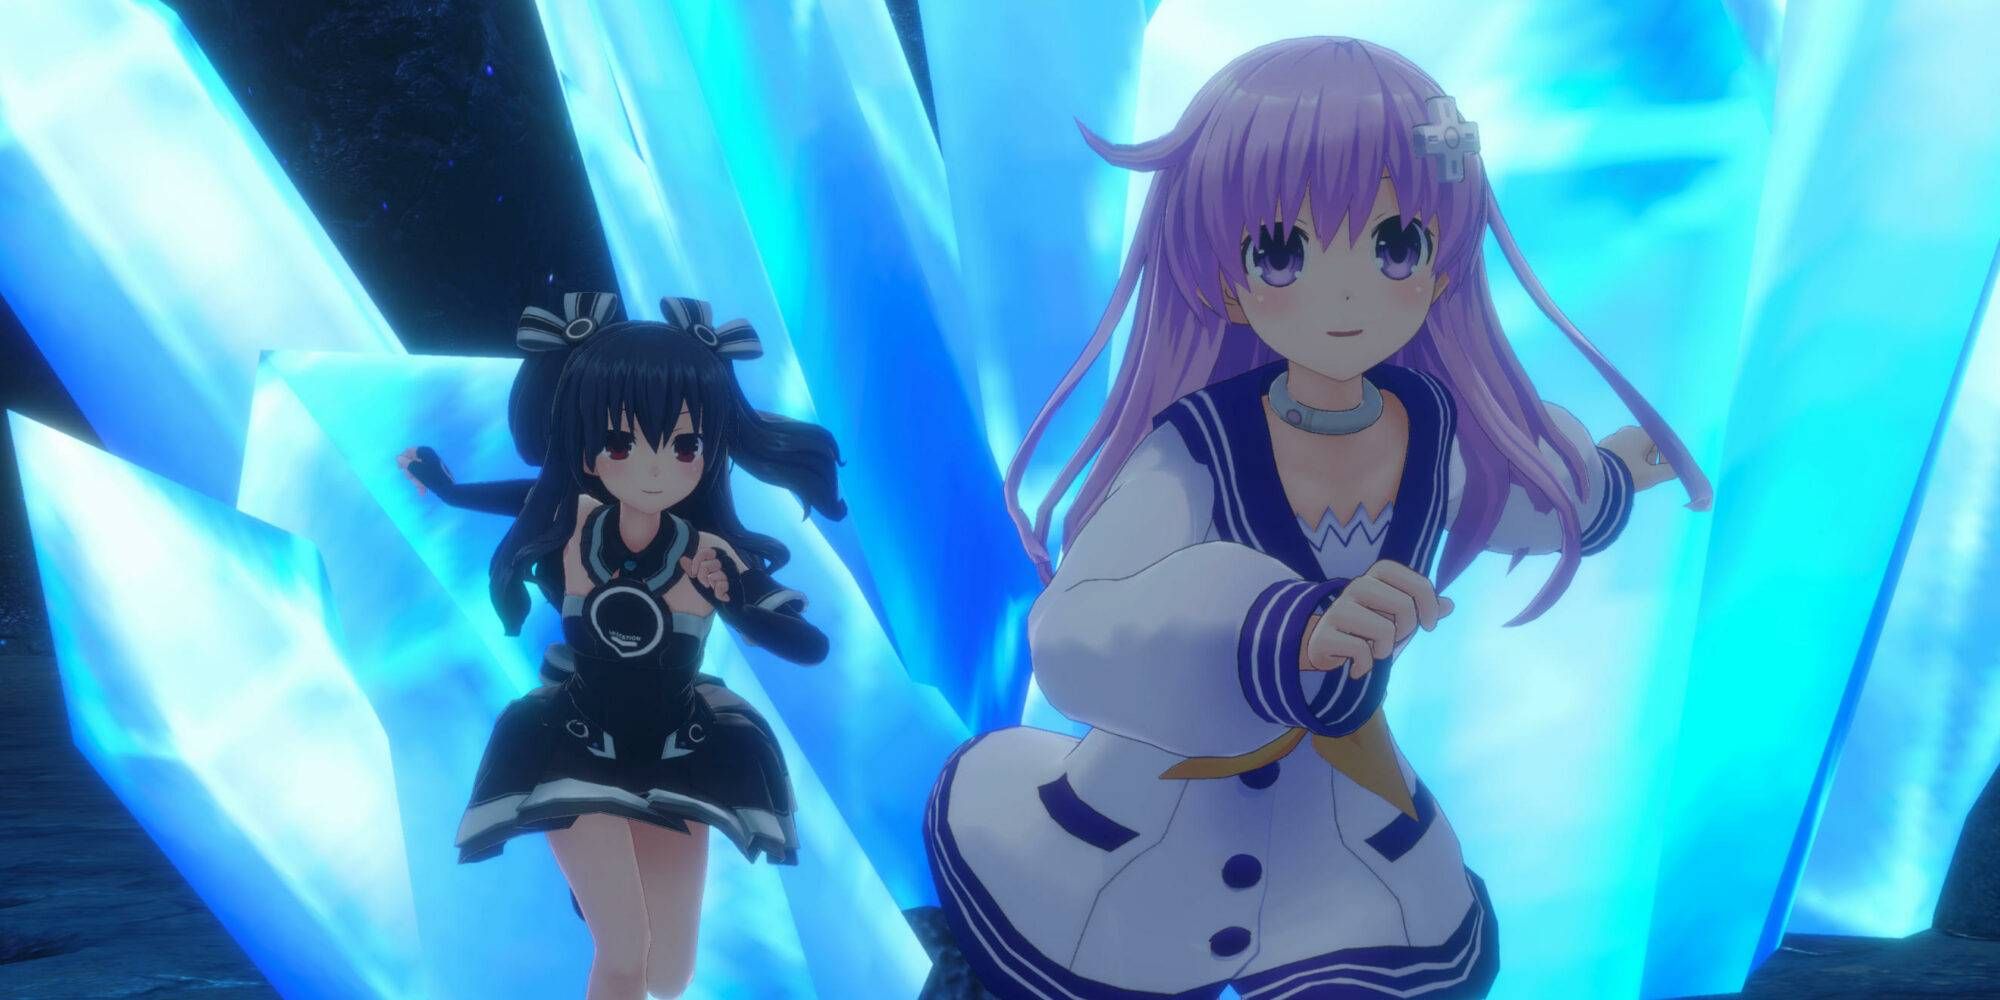 Neptunia: Sisters VS Sisters Main Characters Moving From Large Blue Crystal